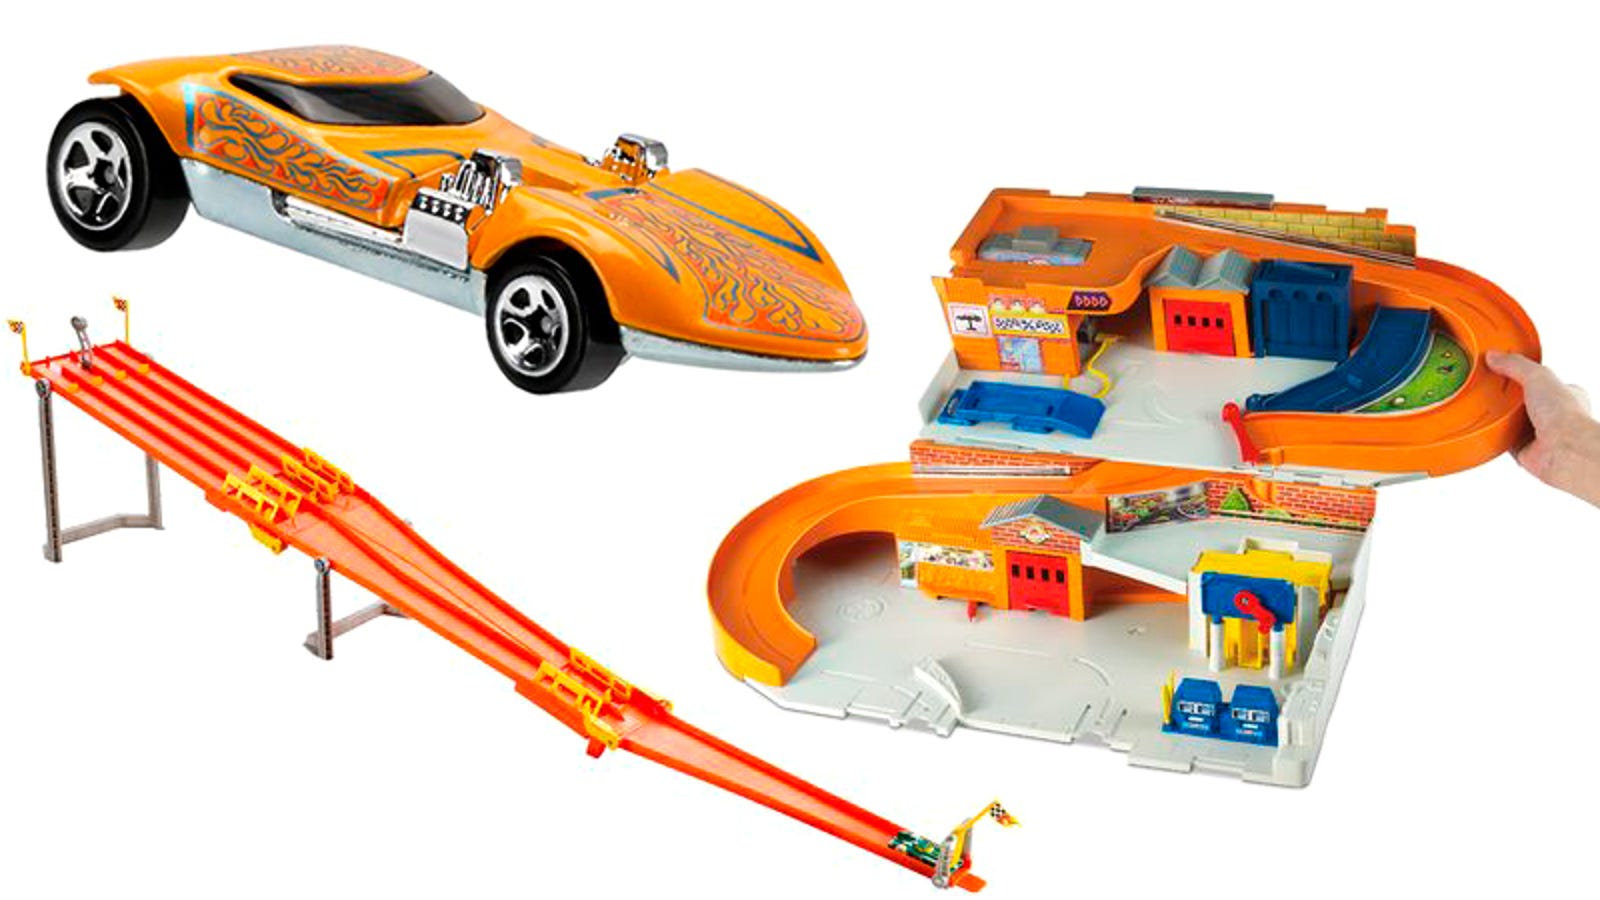 Hot Wheels Is Reviving Some Classic '80s Cars and Sets For a New Retro Line